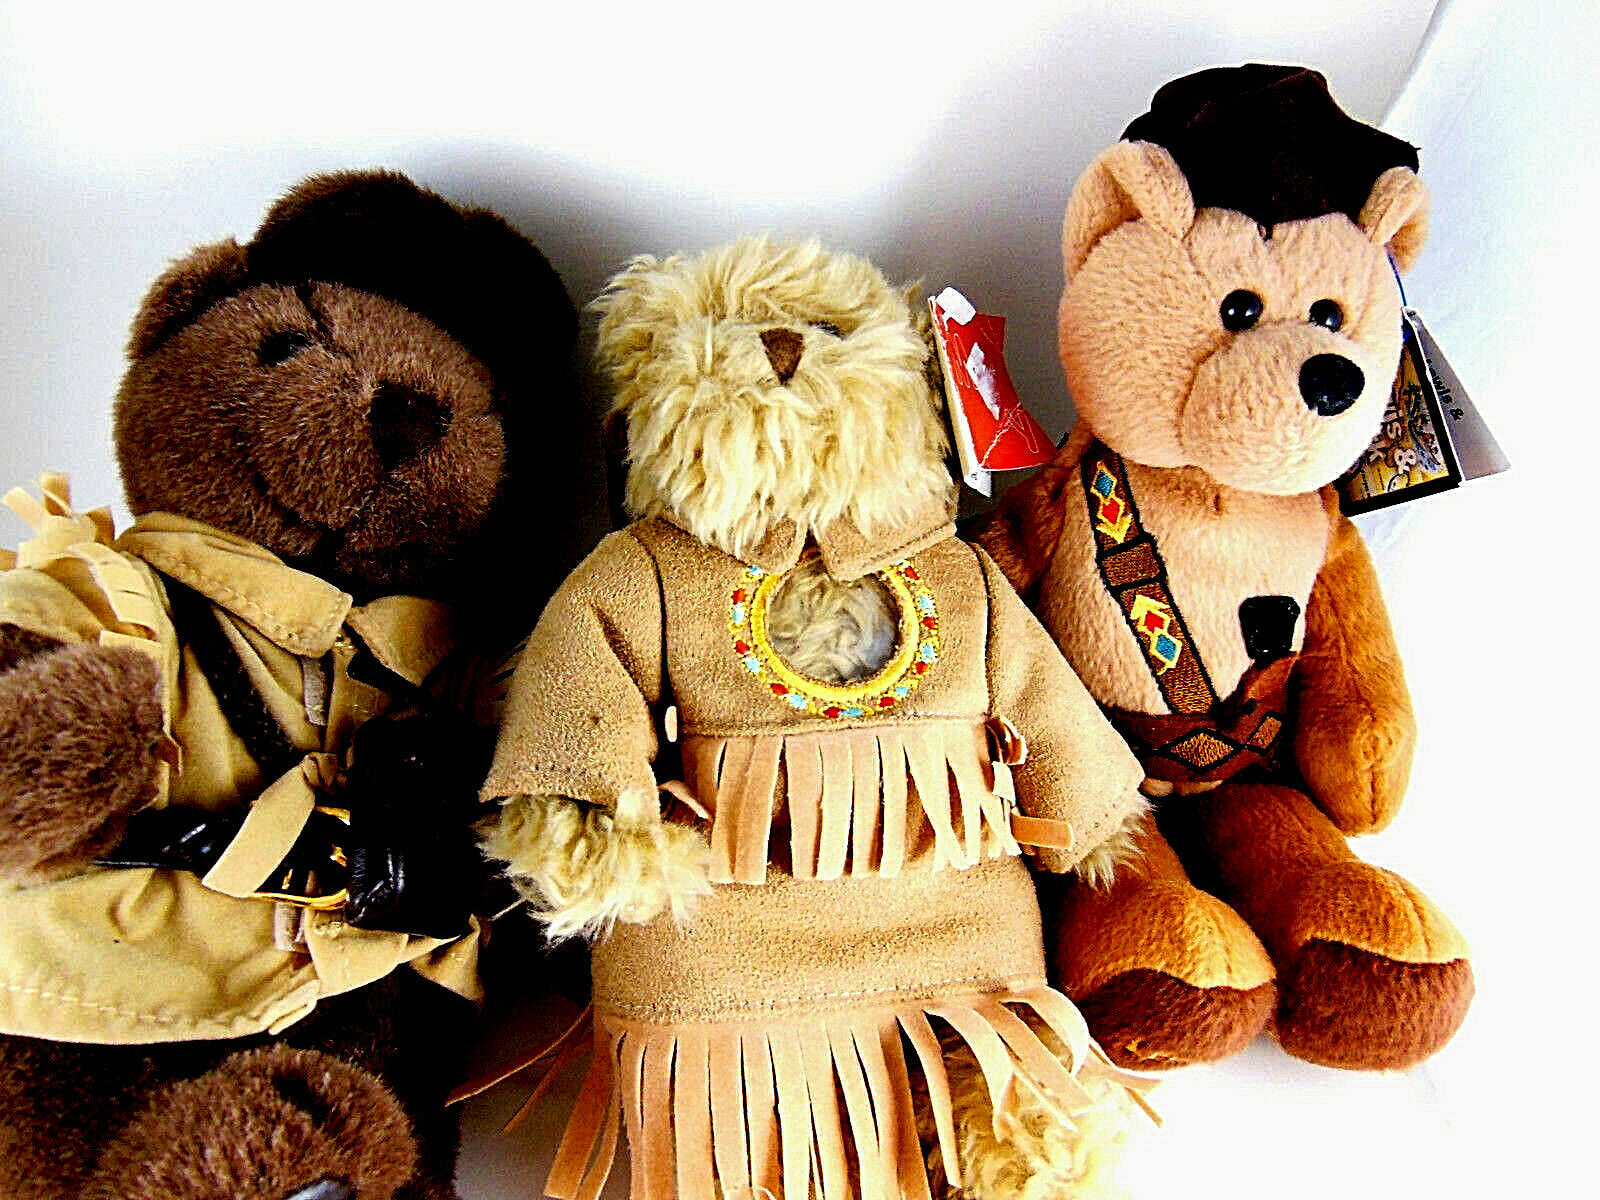 Daniel Boone Sacagawea Meriwether Lewis teddy bears with baby papoose 9" - $21.77